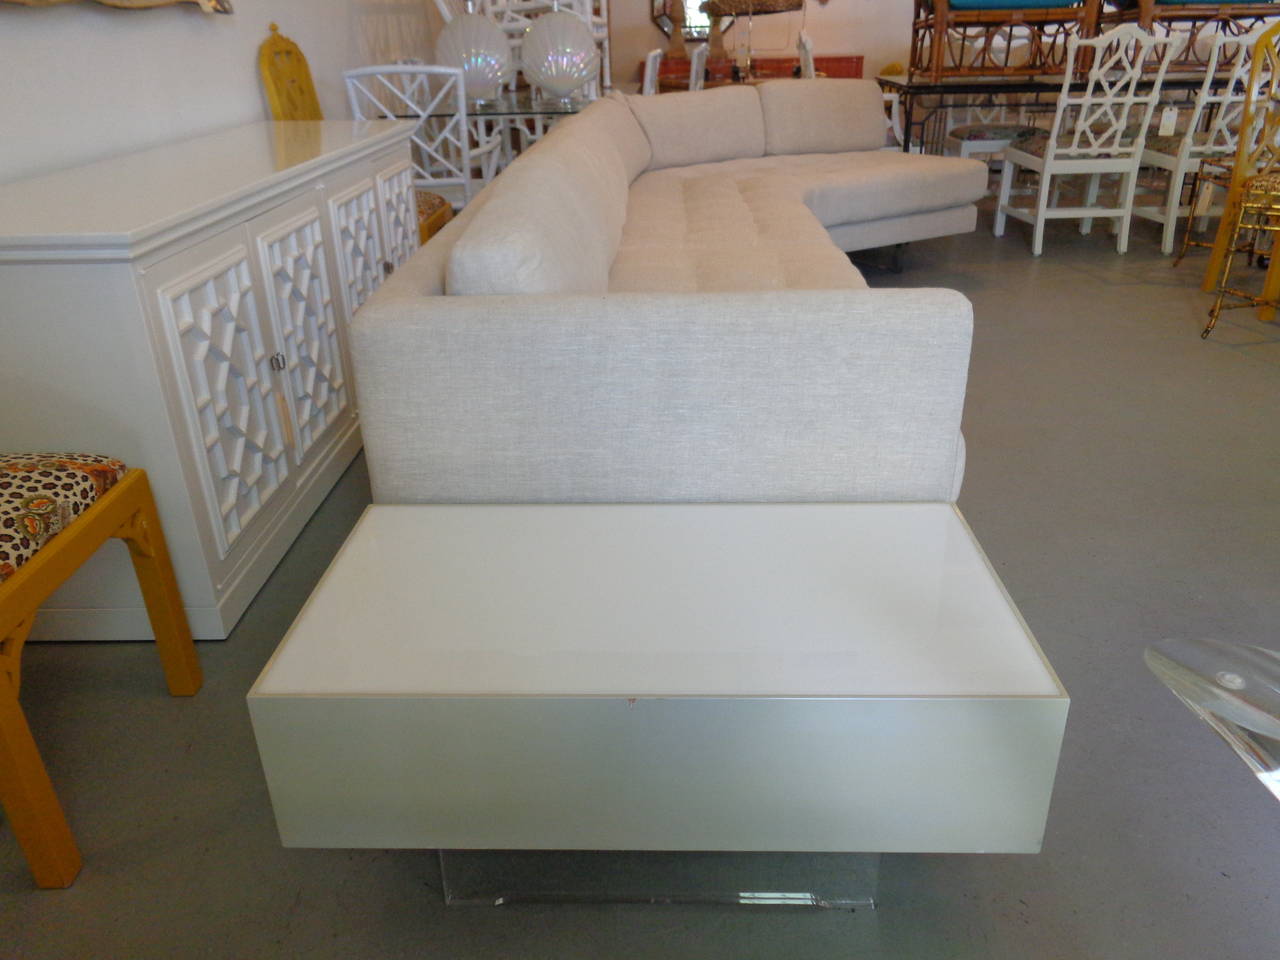 Vintage Vladimir Kagan omnibus sofa with Lucite legs in nice as found vintage condition. The sofa is in two sections.